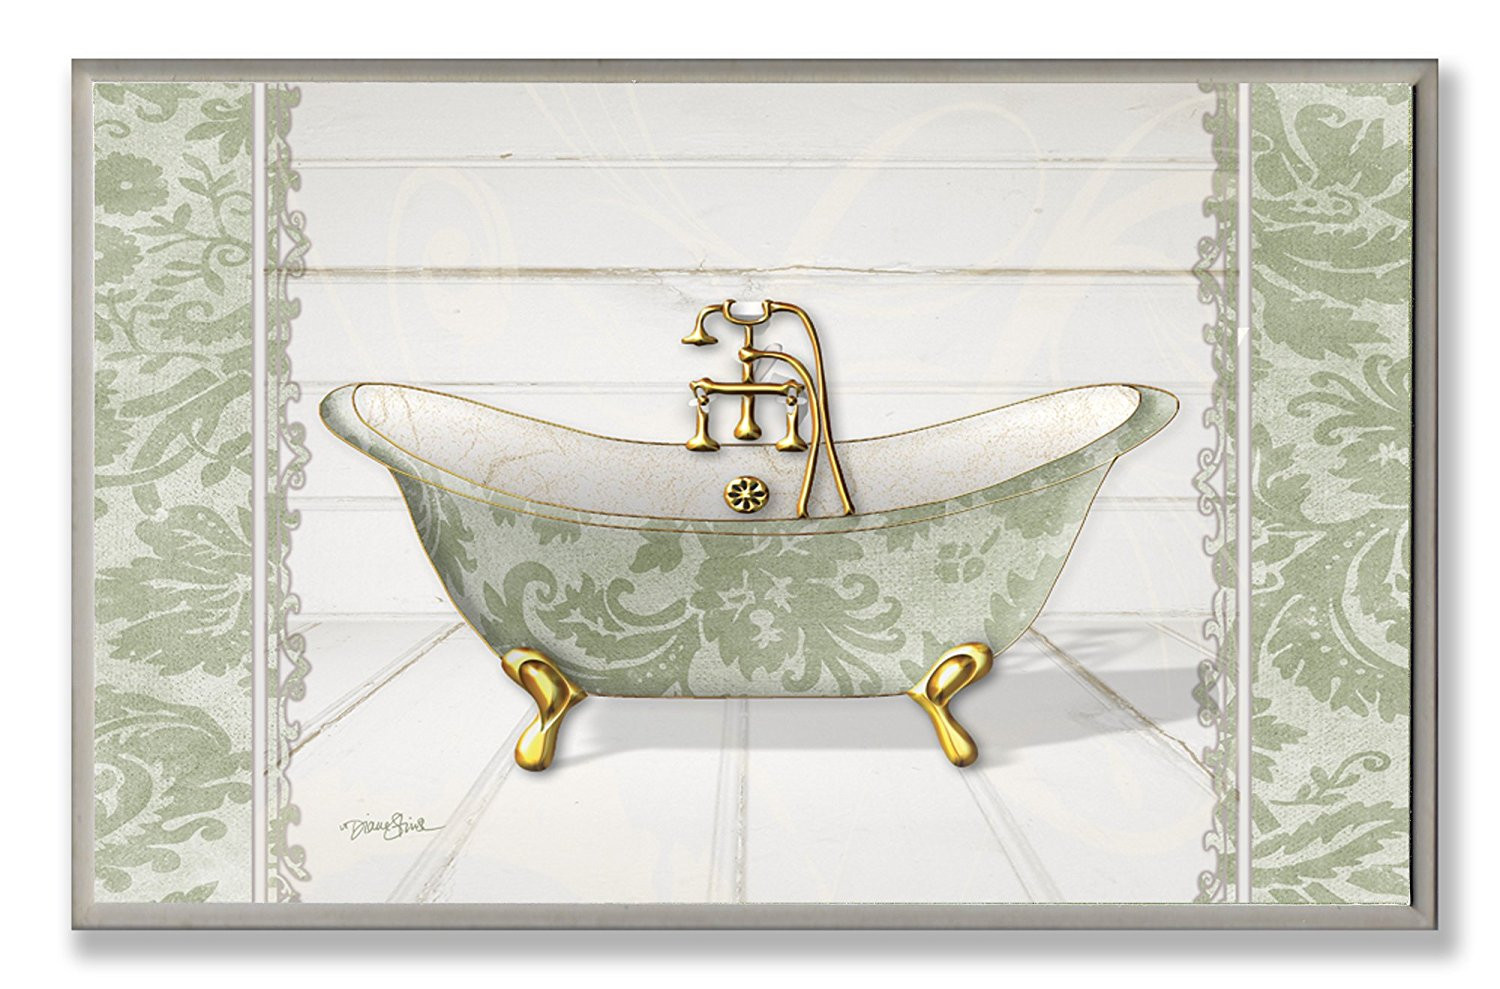 Bathroom Wall Decor Sets
 The Stupell Home Decor Collection Green Toile Tub Center